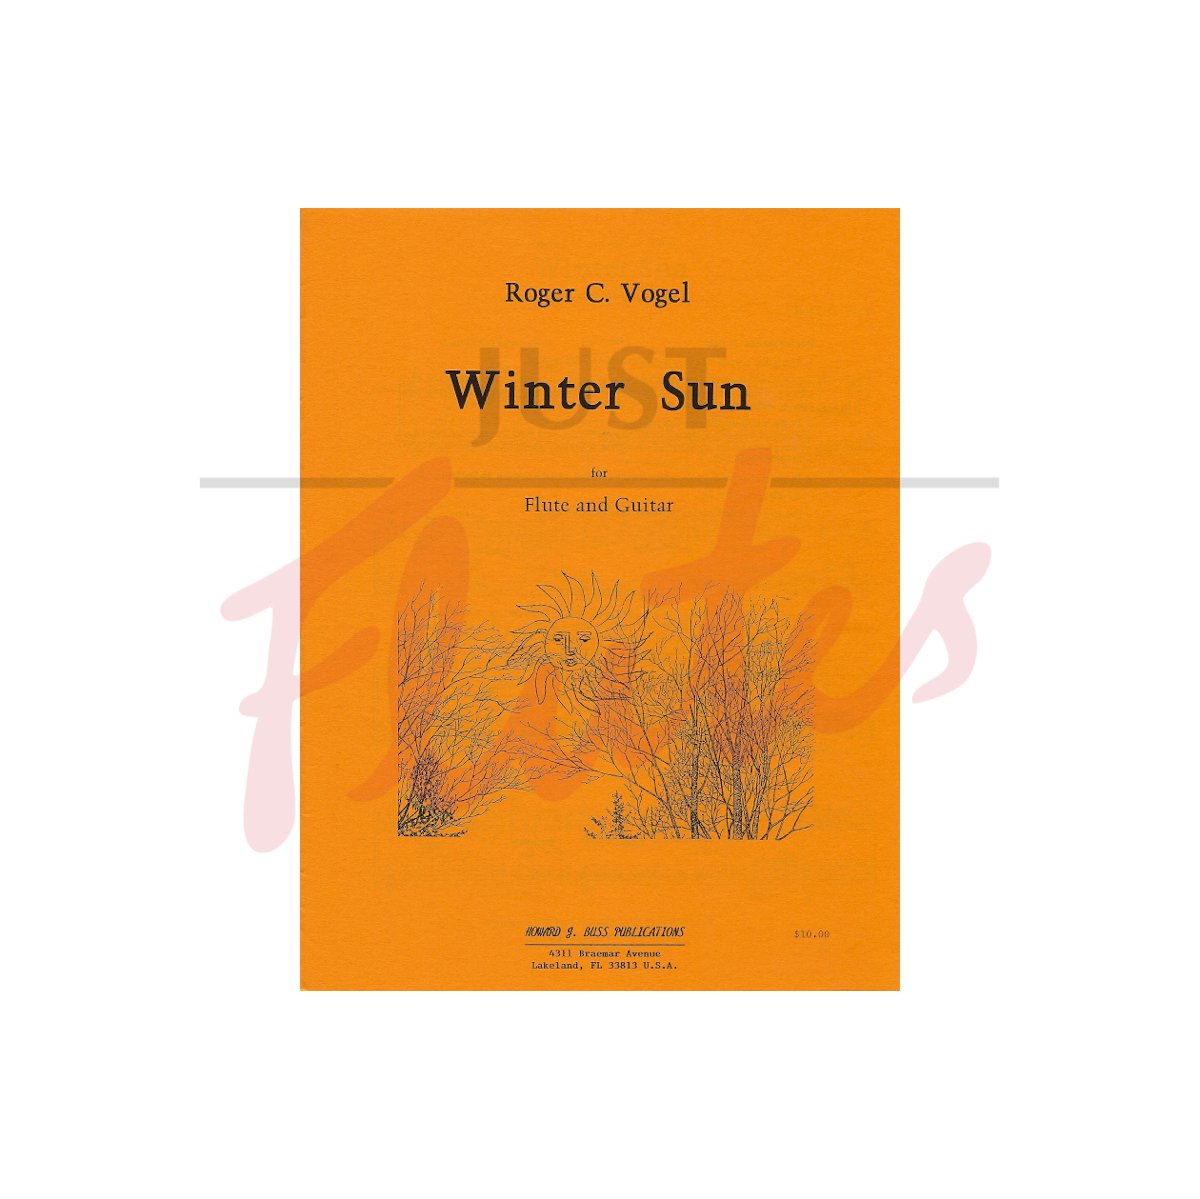 Winter Sun for Flute and Guitar